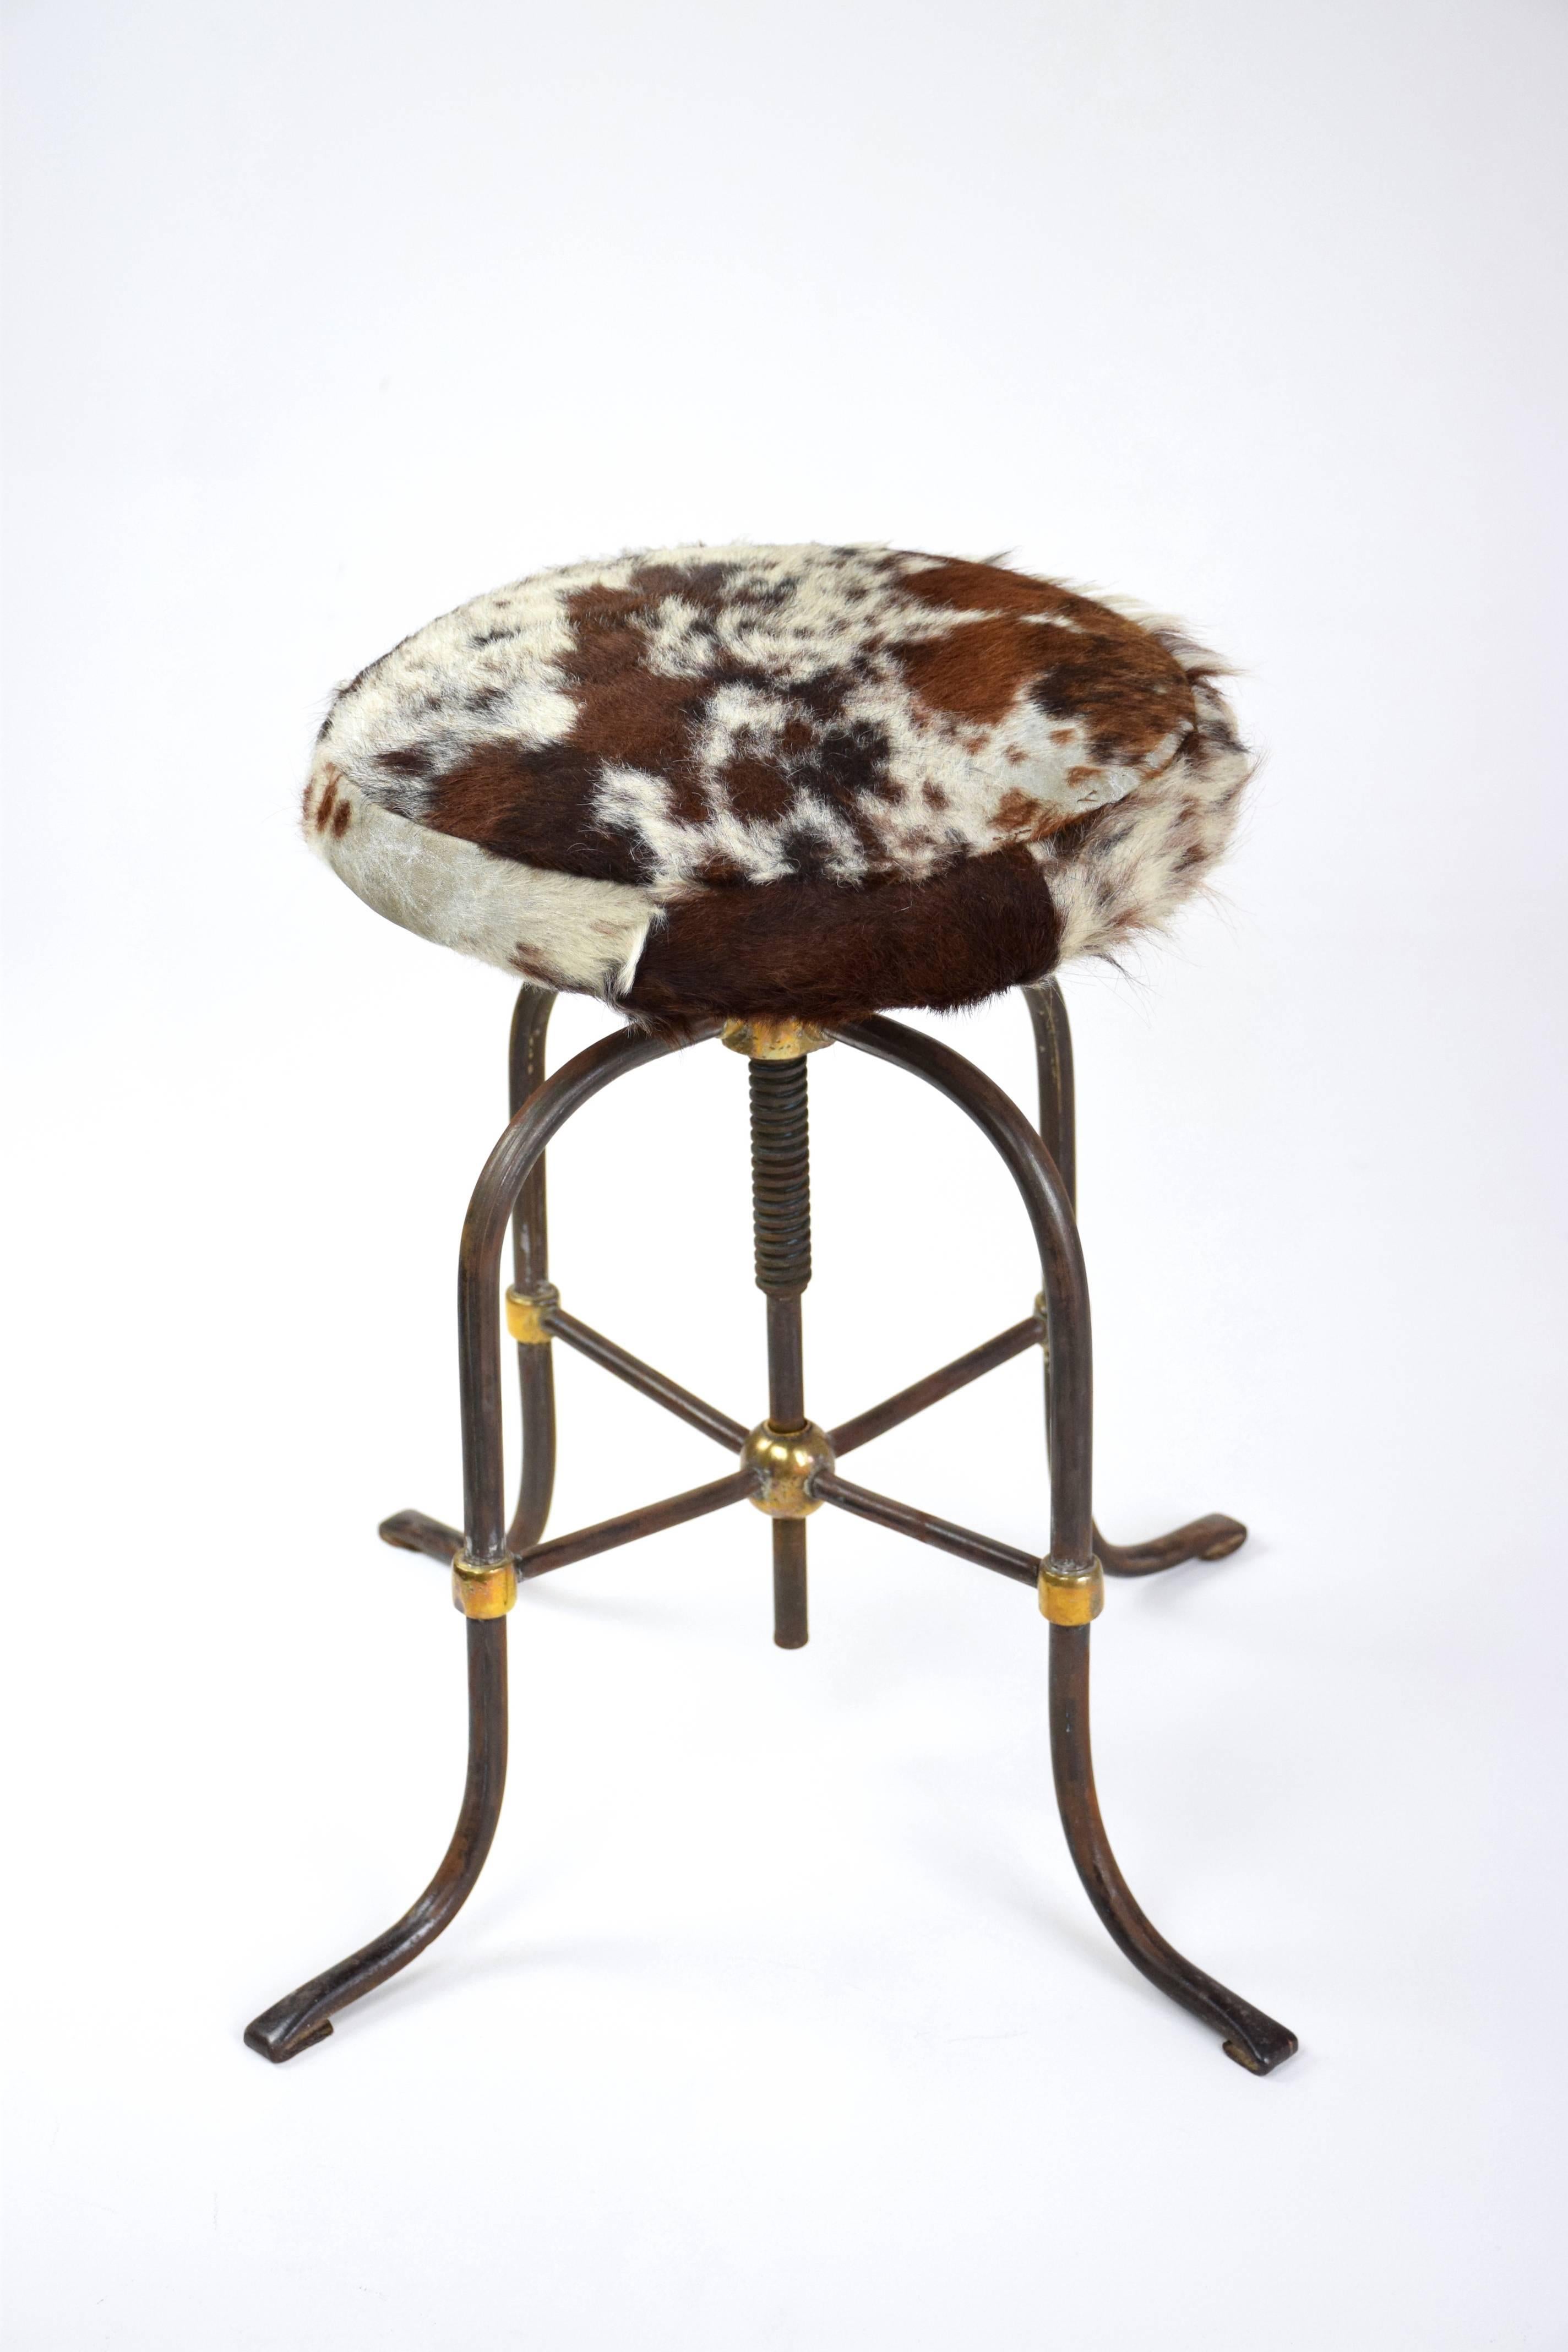 Fantastic original French Art Deco, 20th Century stool from the 1930's with an adjustable cowhide seat, Industrial inspired steel structure with brass sphere details and cabriole style legs.
In its original vintage condition.
  